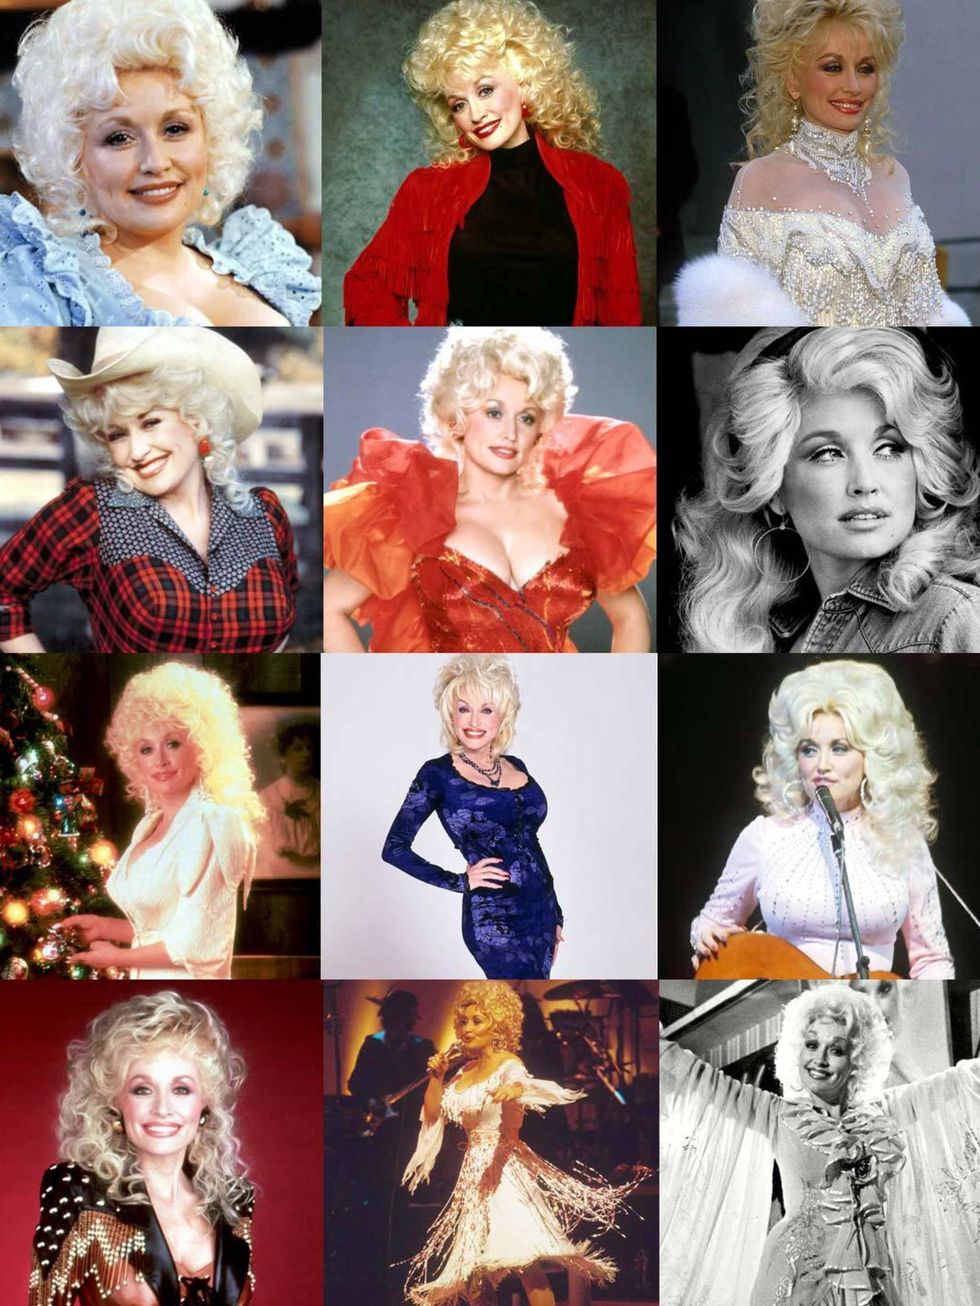 <p>Big wigs and an even bigger talent, when it comes to glamour Dolly Parton has it in spades. In her four-decade career, shes had 25 number-one hits, sold 100 million records and even opened her very own (enormously successful) theme park  <em>Dollywoo